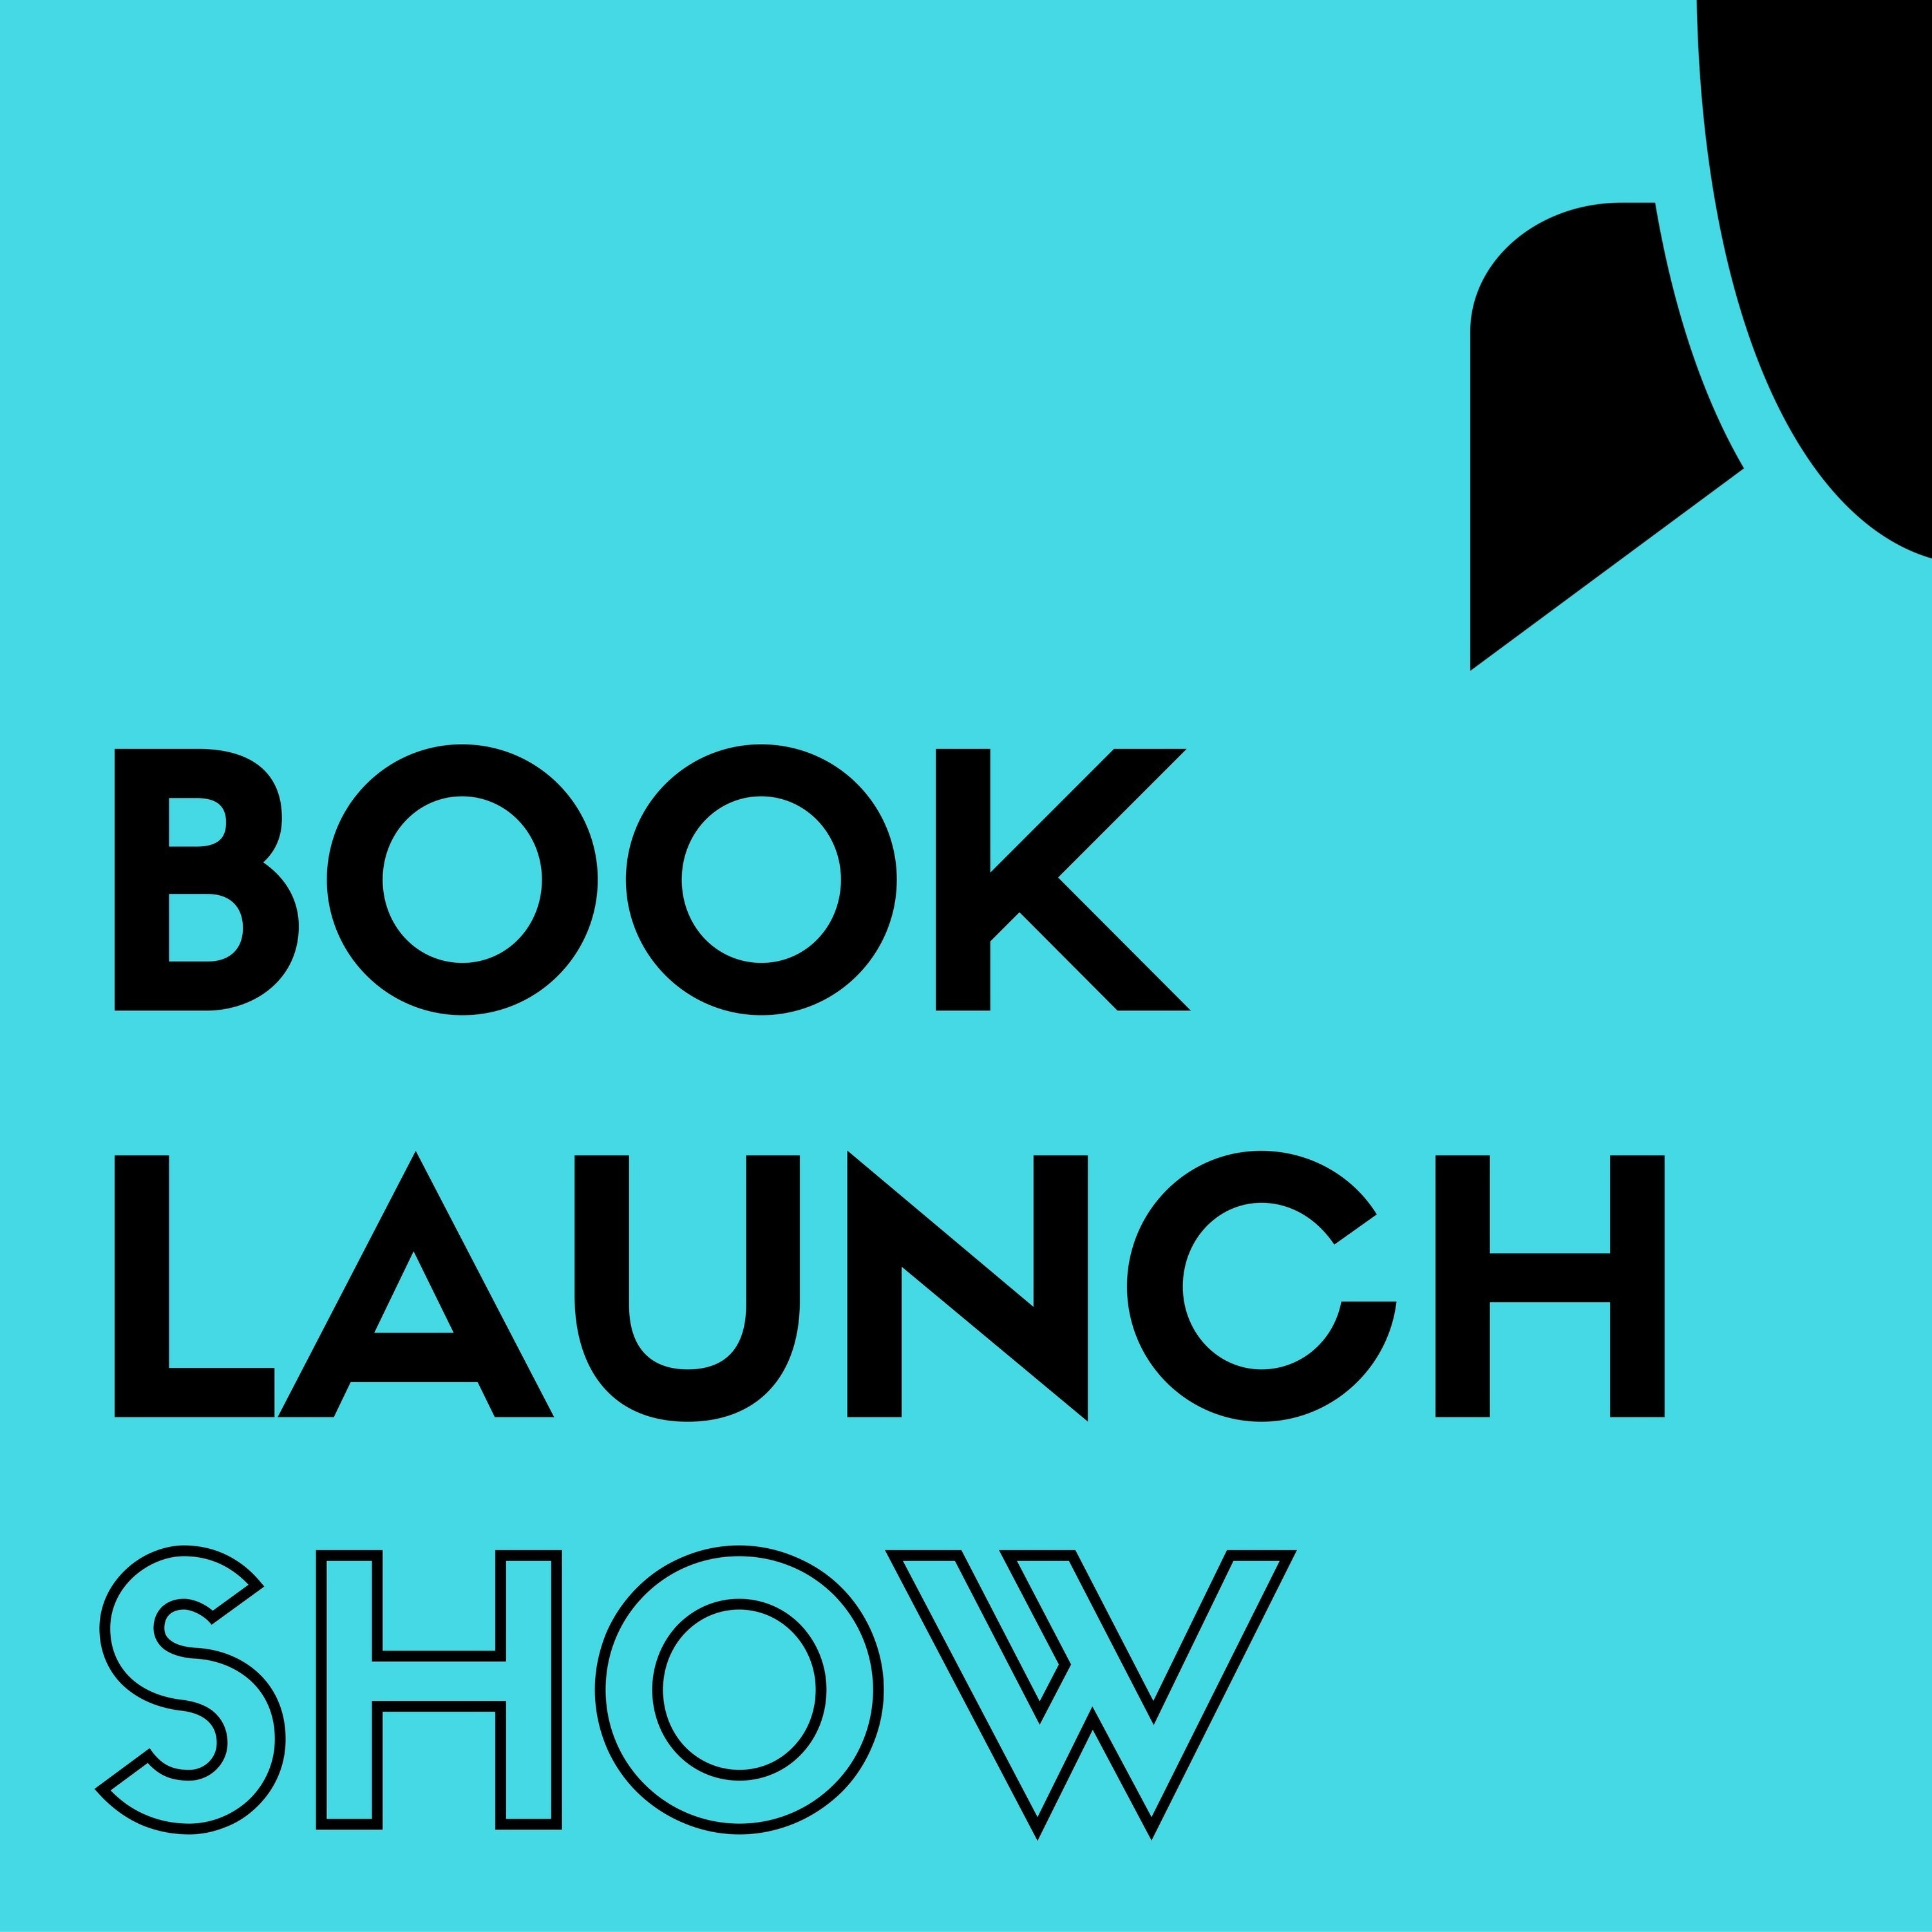 Book Launch Show